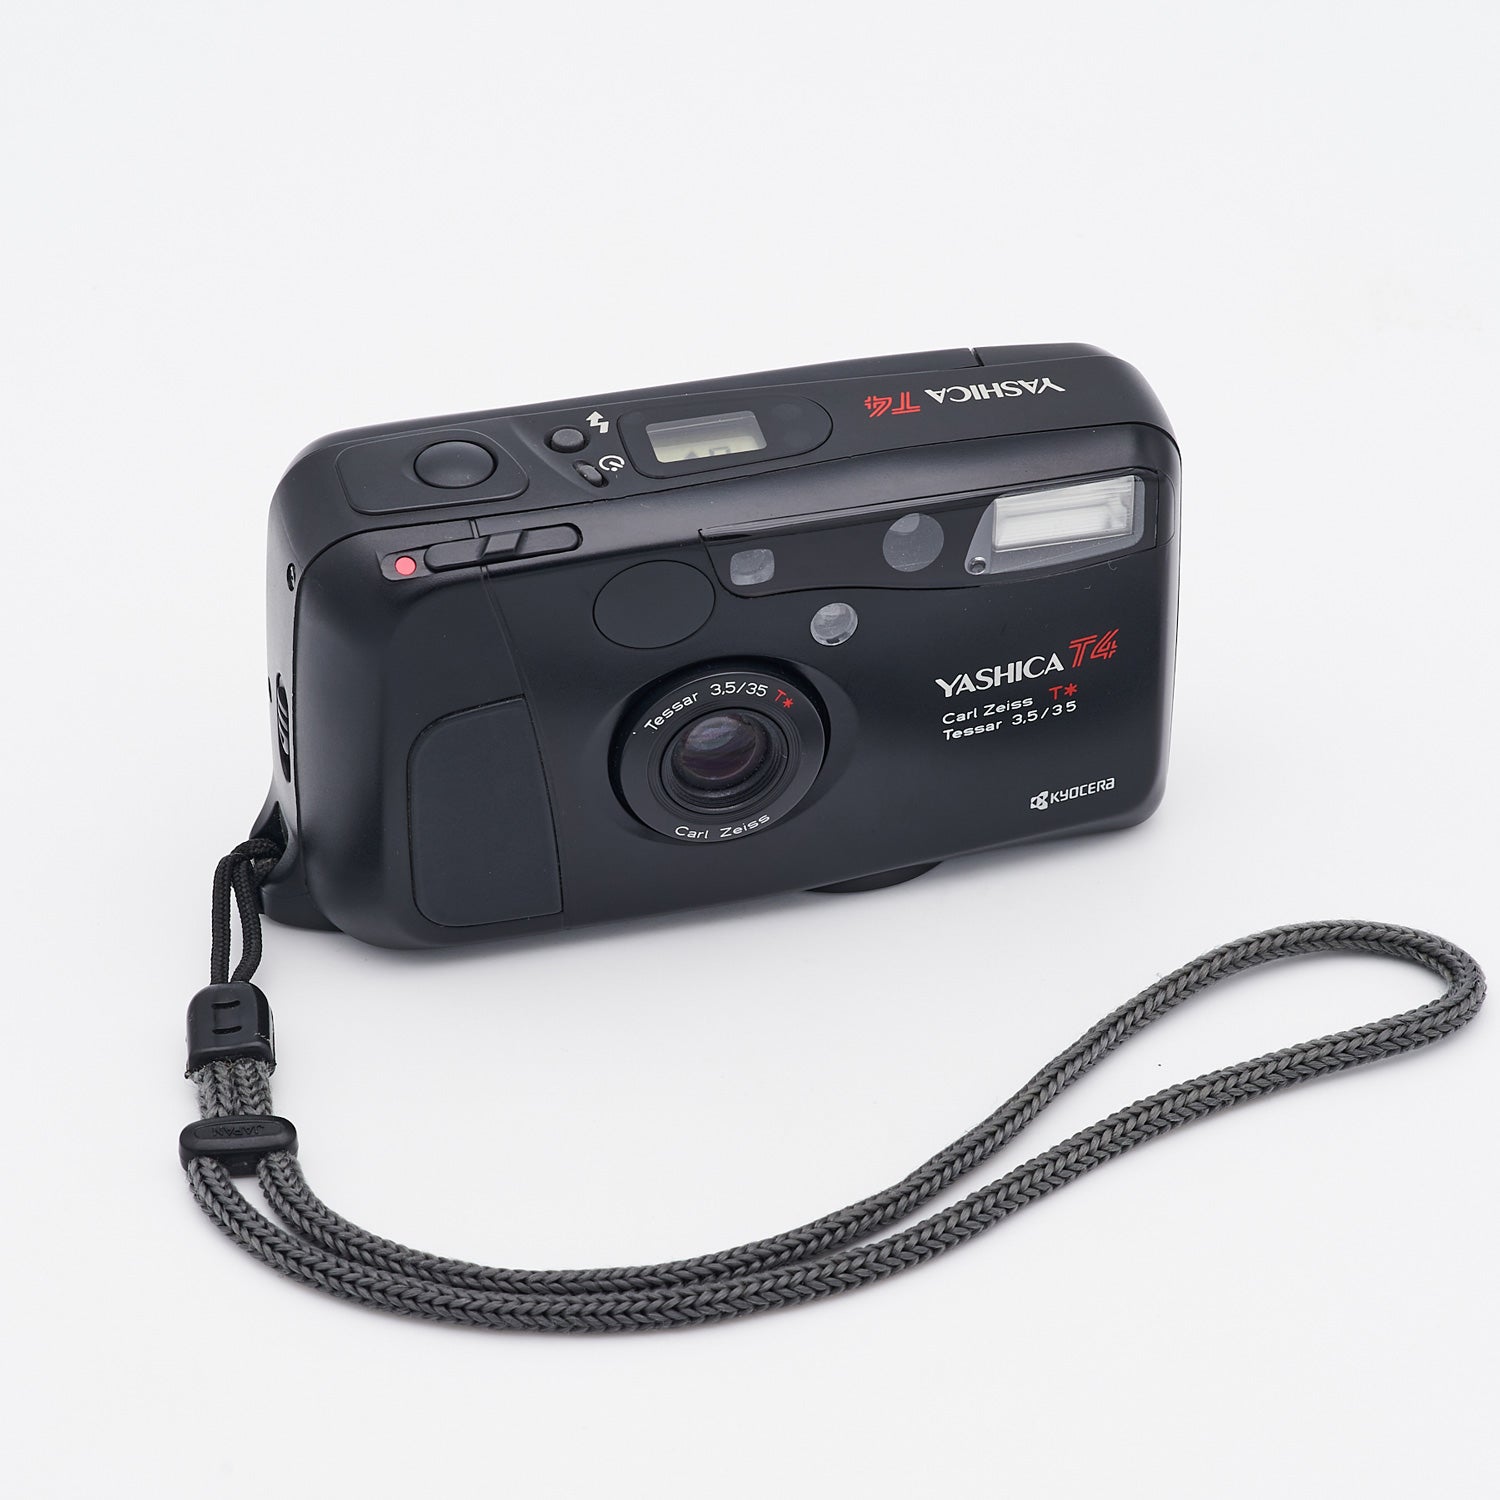 Yashica T4 (S/N 655489)